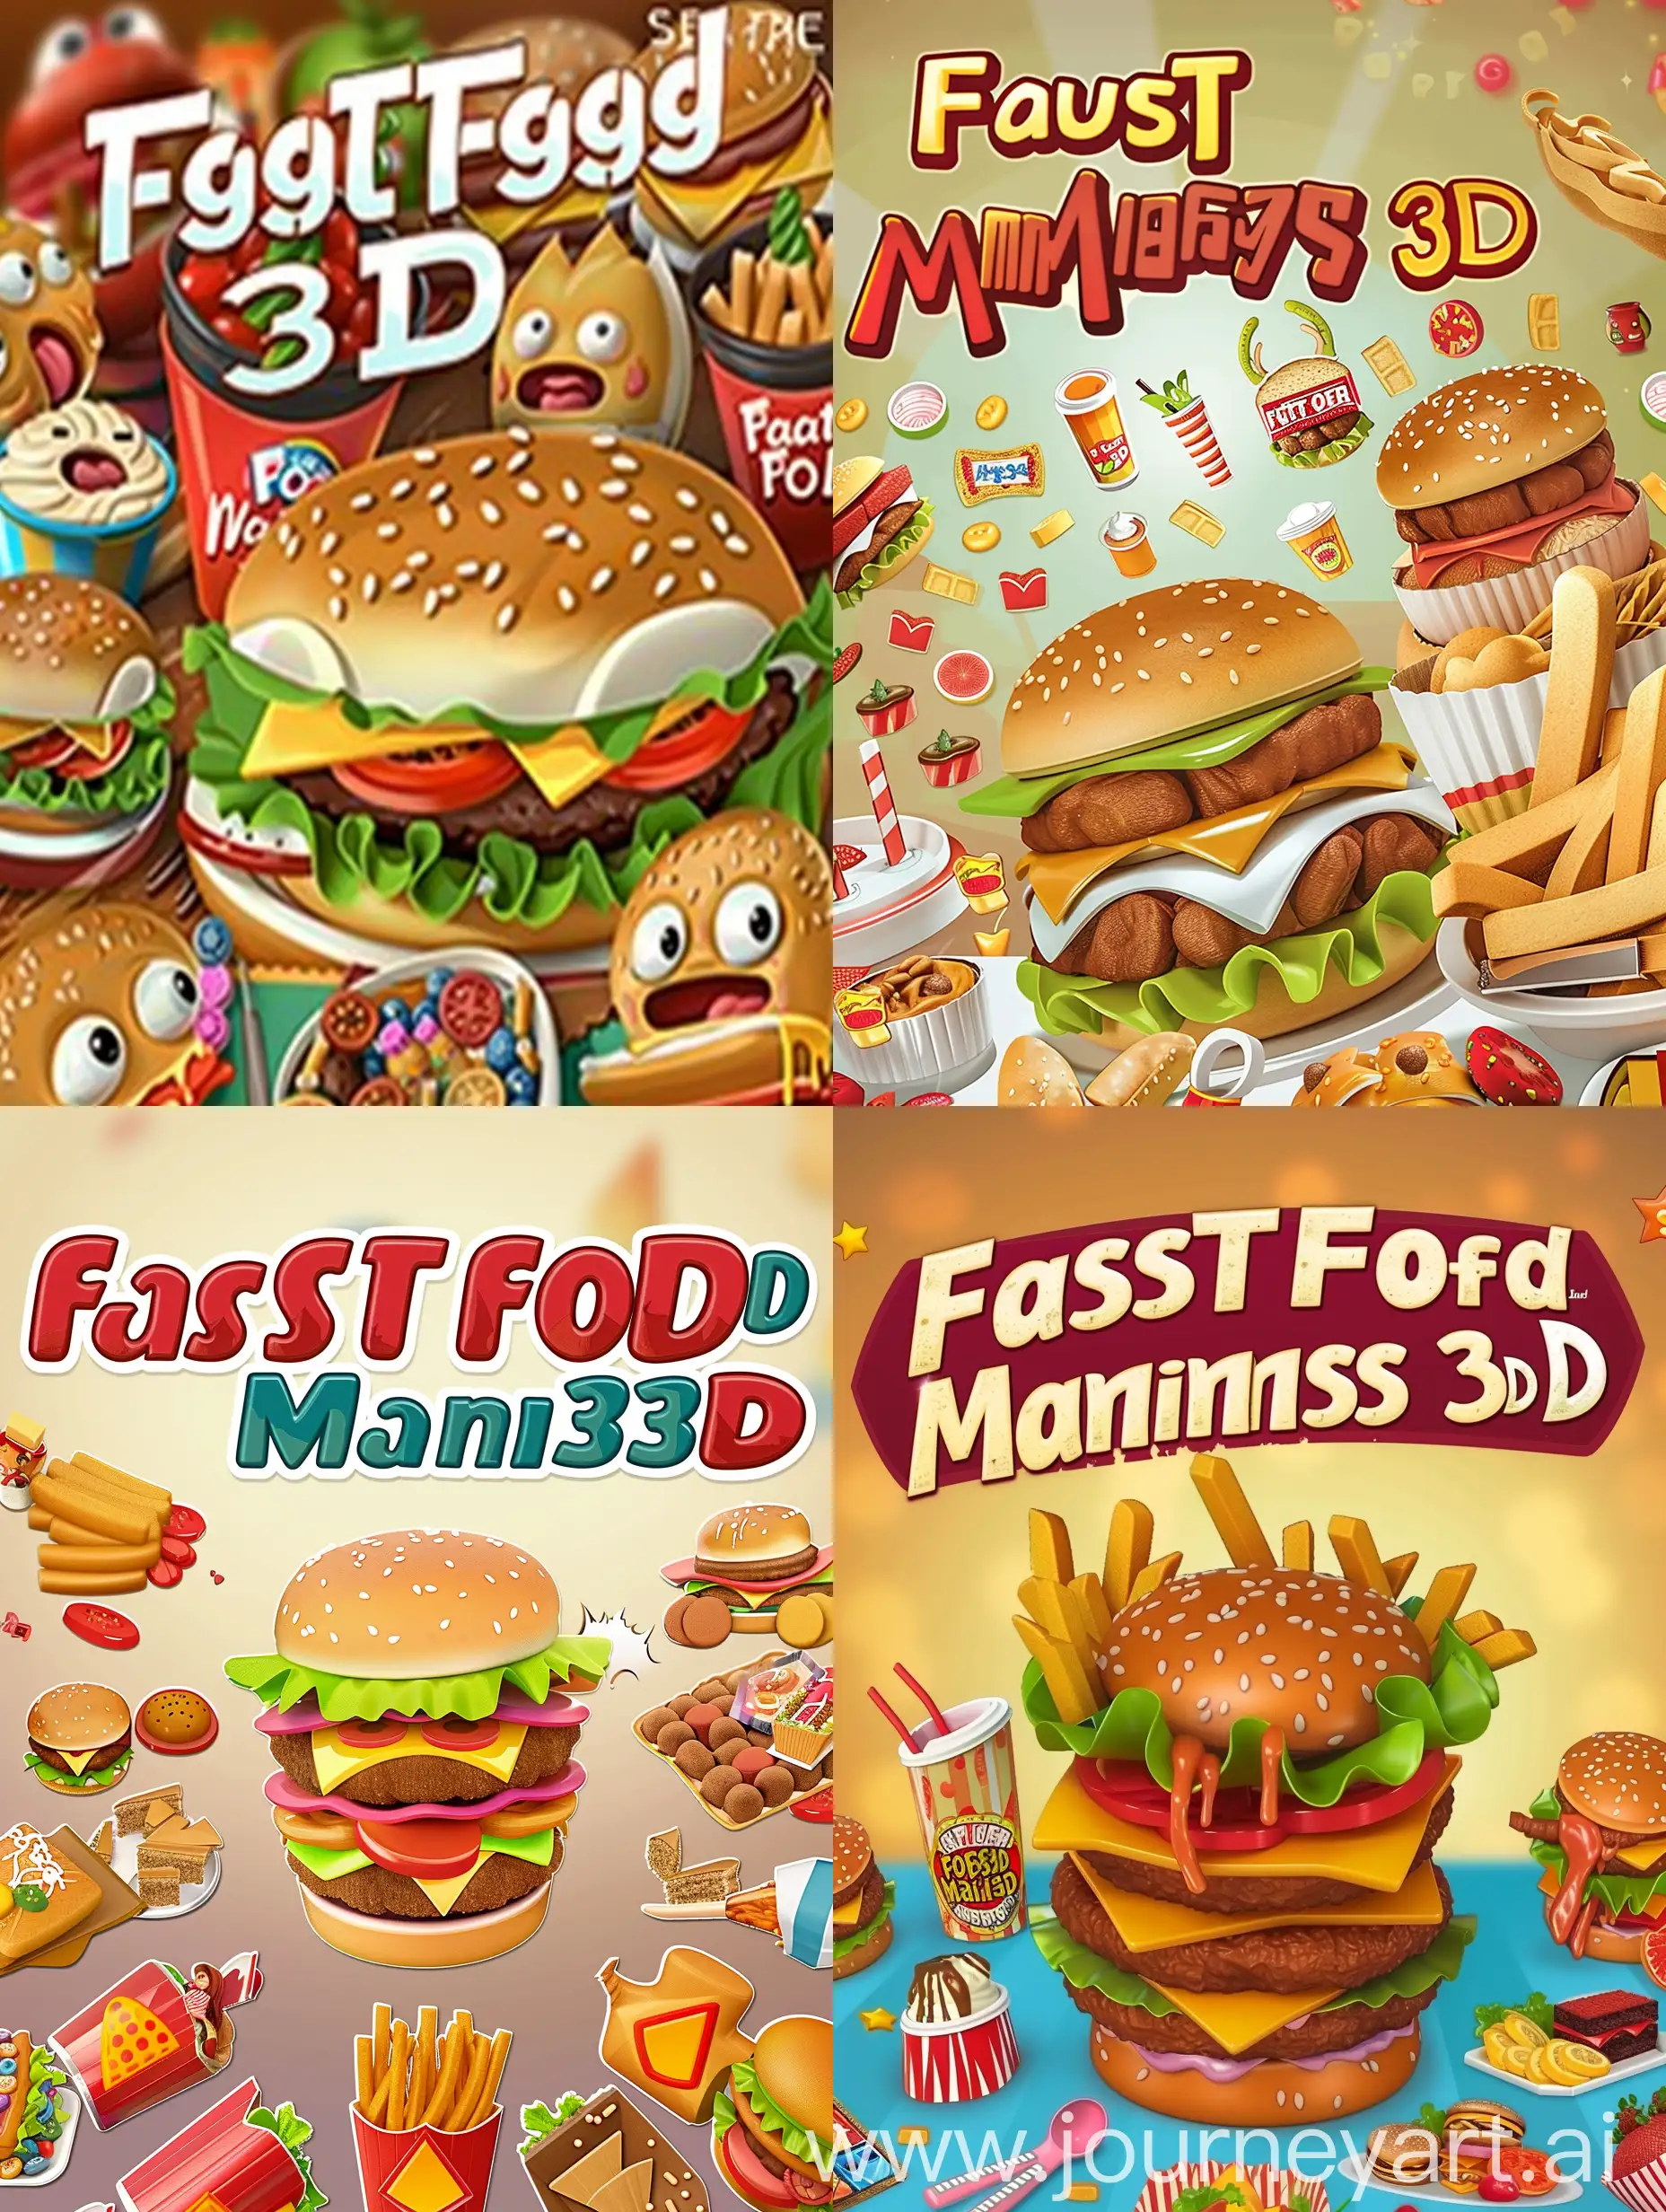 Computer game cover, fast food, match 3, children's, cute, inscription "Fast Food Mania 3D" 